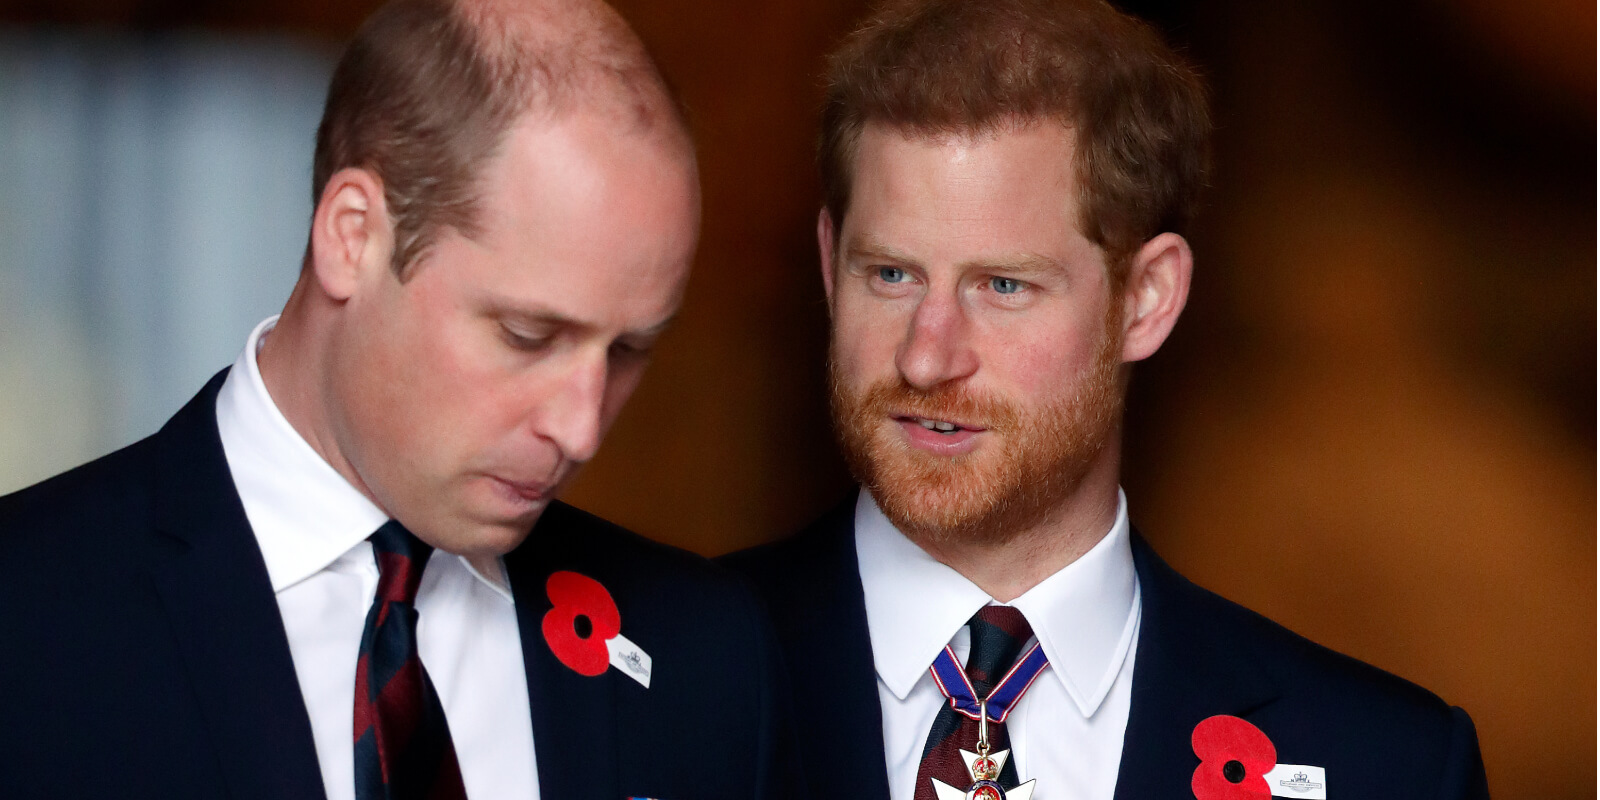 Prince William and Prince Harry attend an Anzac Day Service of Commemoration and Thanksgiving at Westminster Abbey on April 25, 2018.